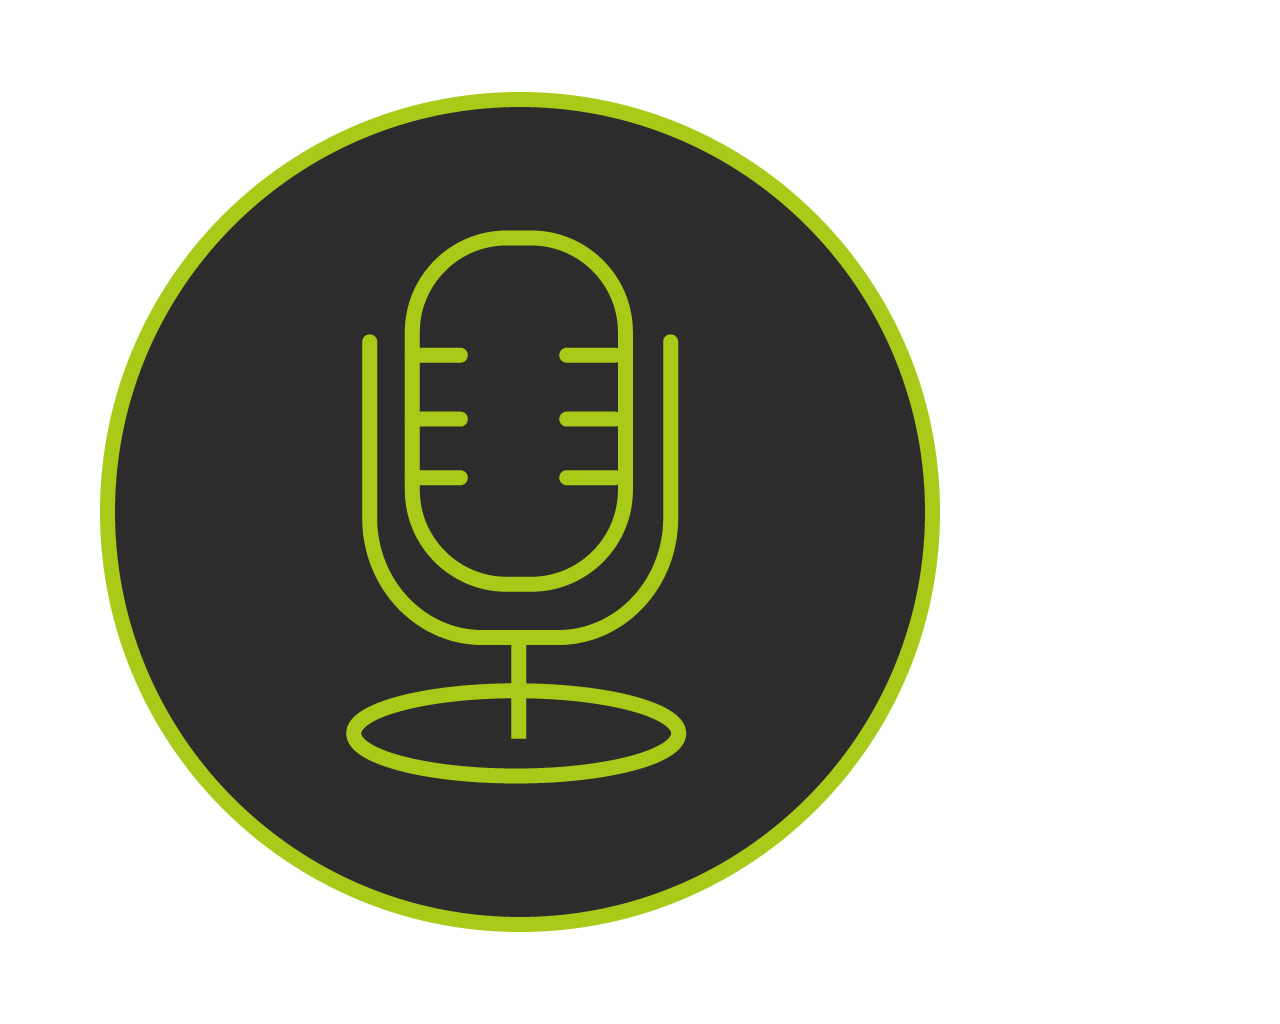 A microphone icon